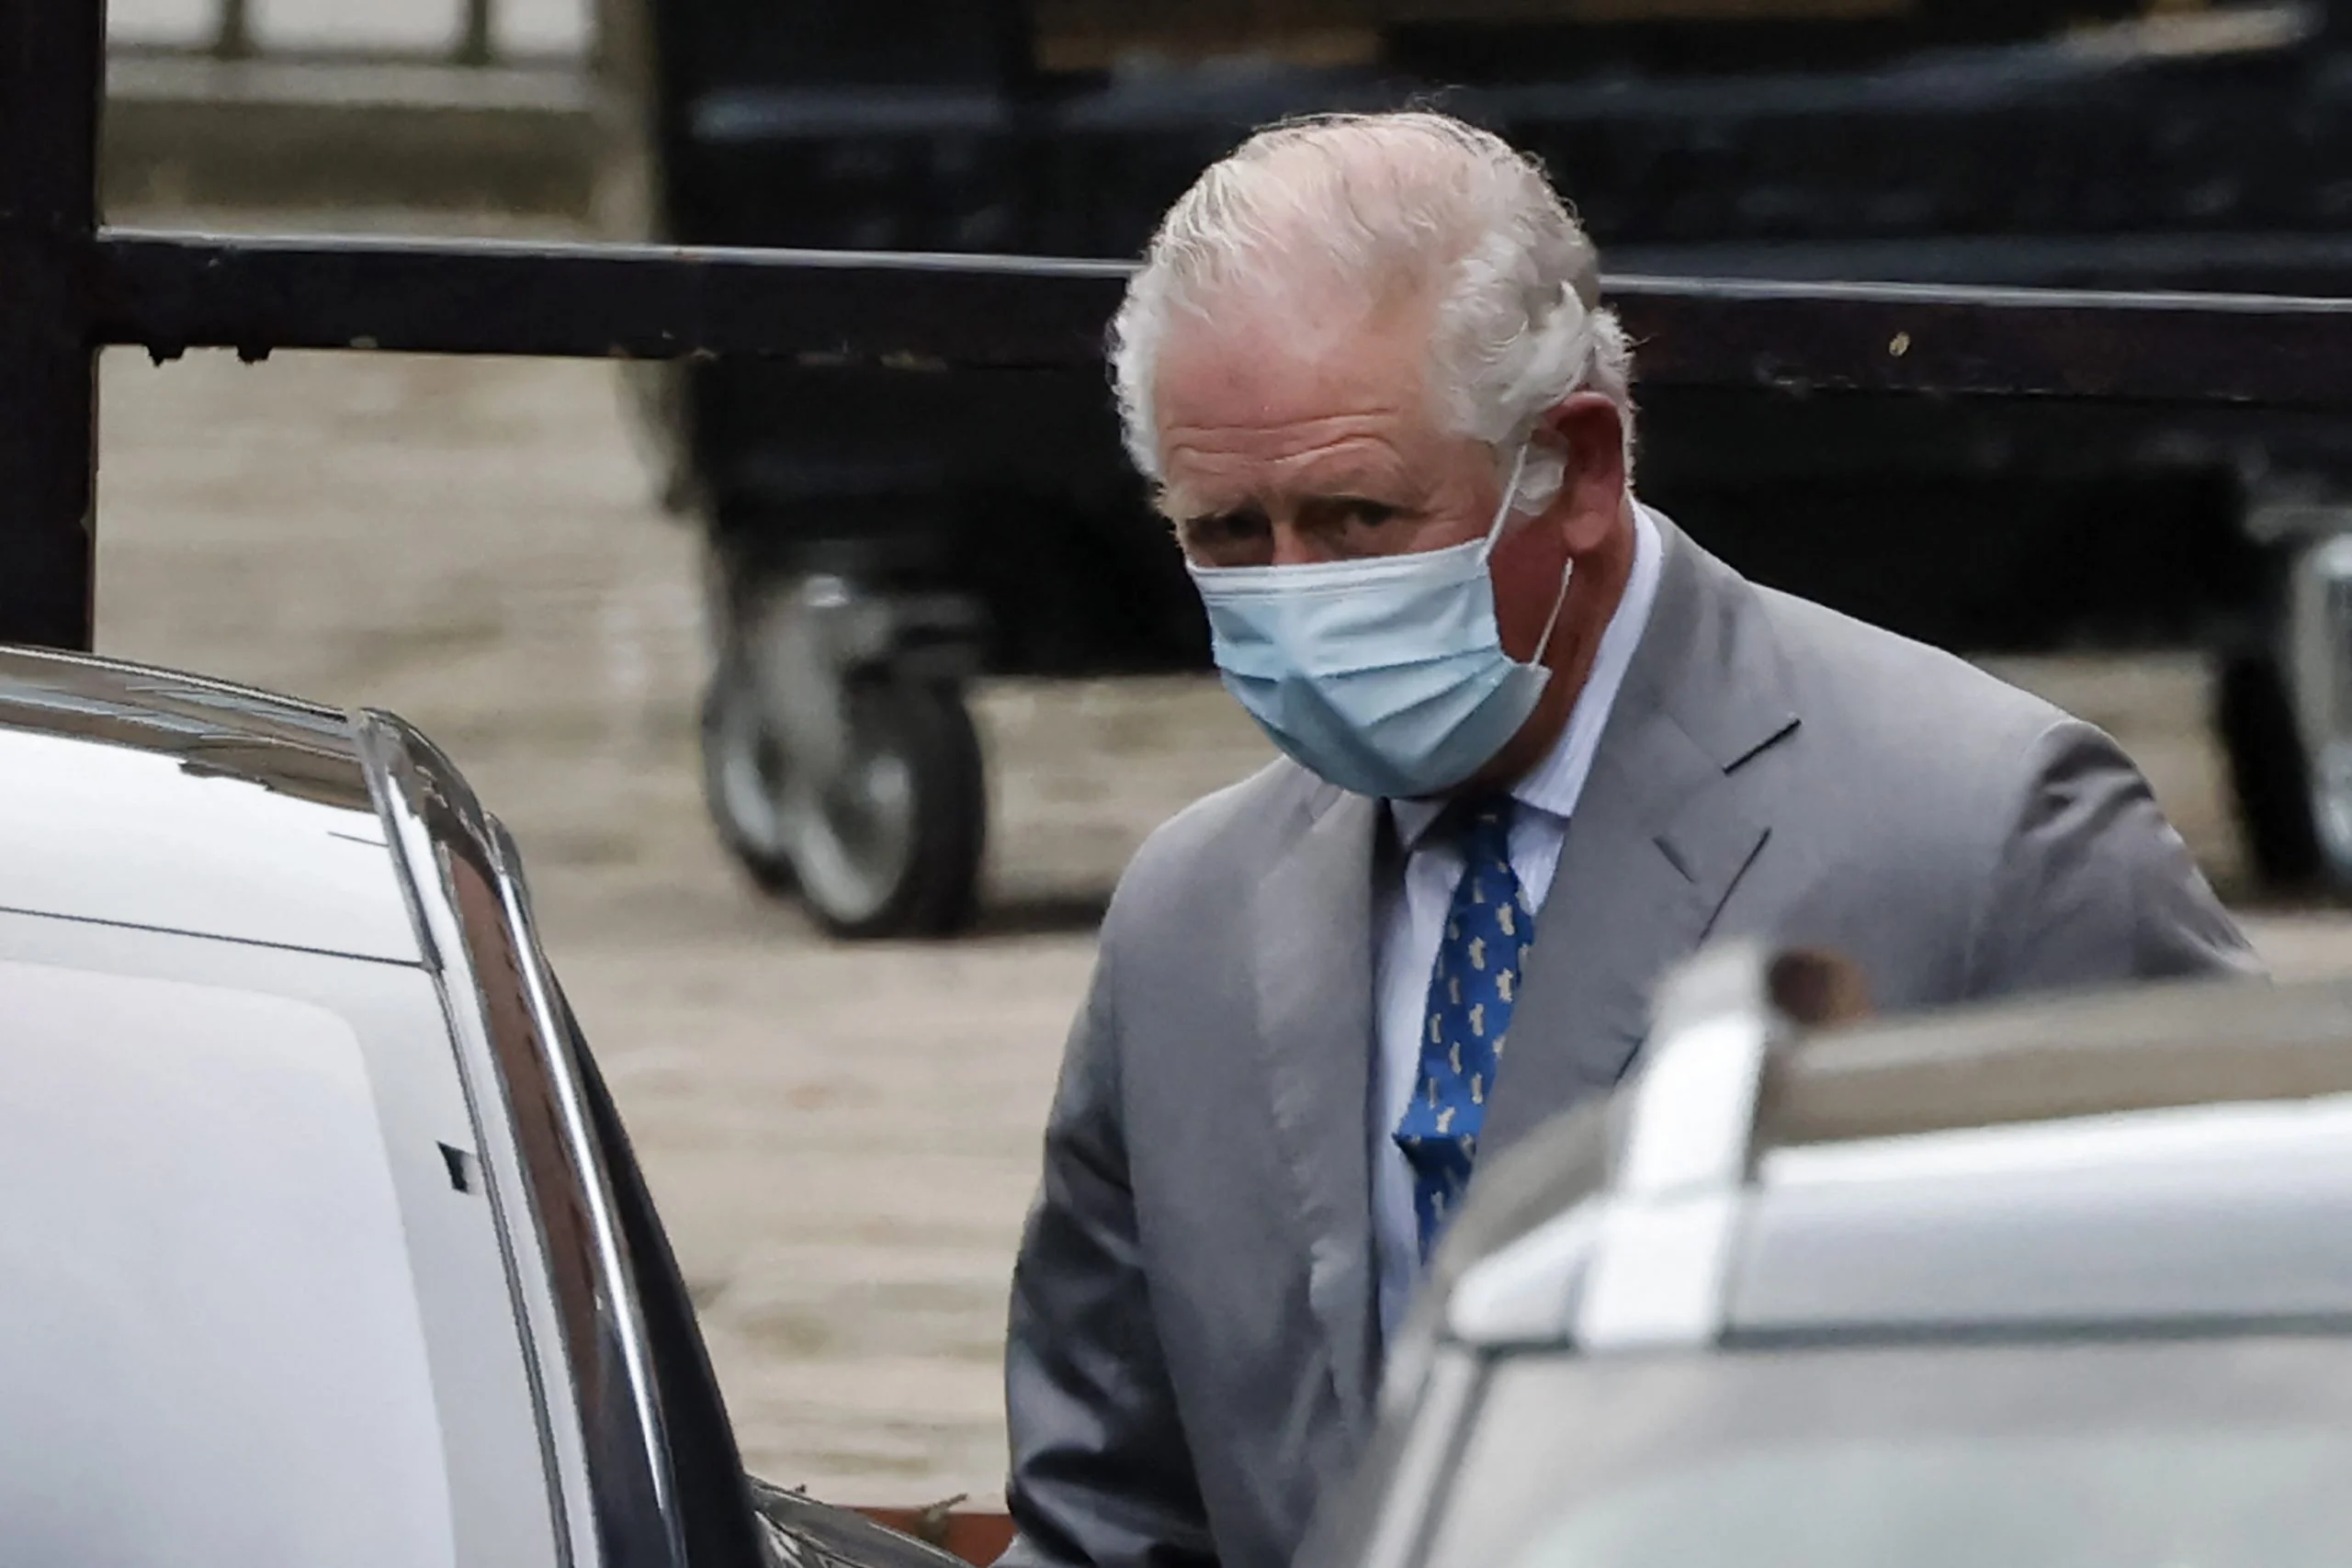 Prince Charles reportedly tests positive for COVID-19